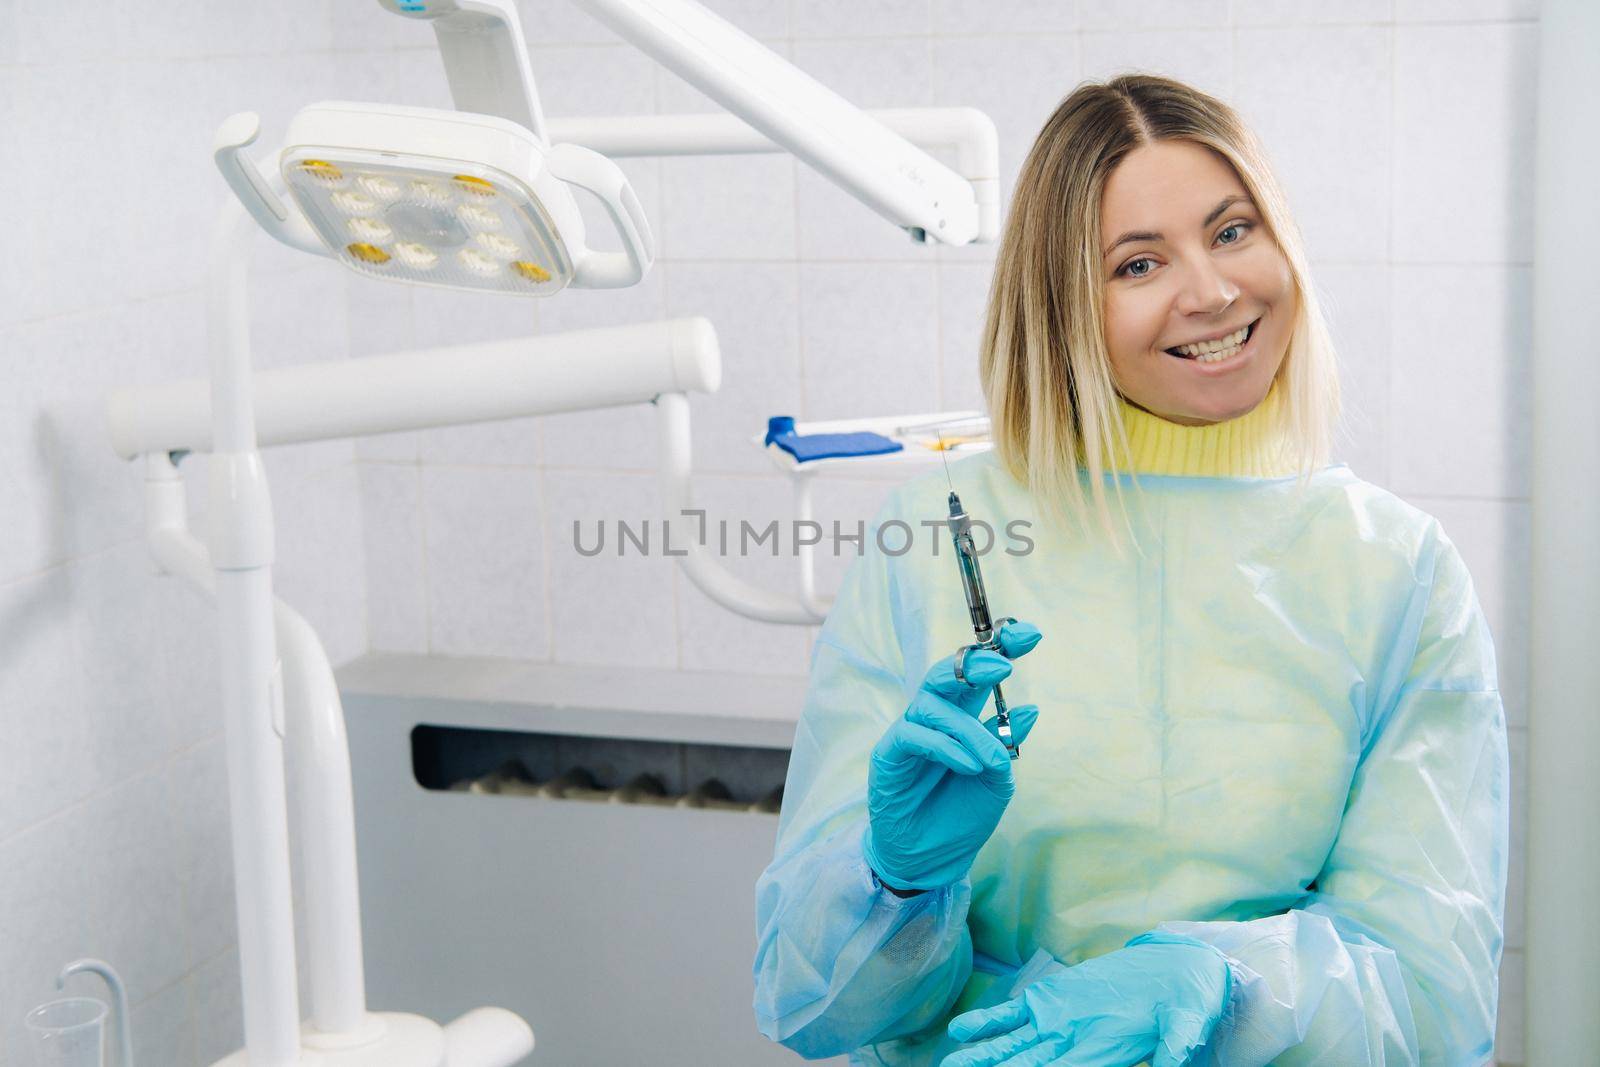 The dentist holds an injection syringe for the patient in the office by Lobachad